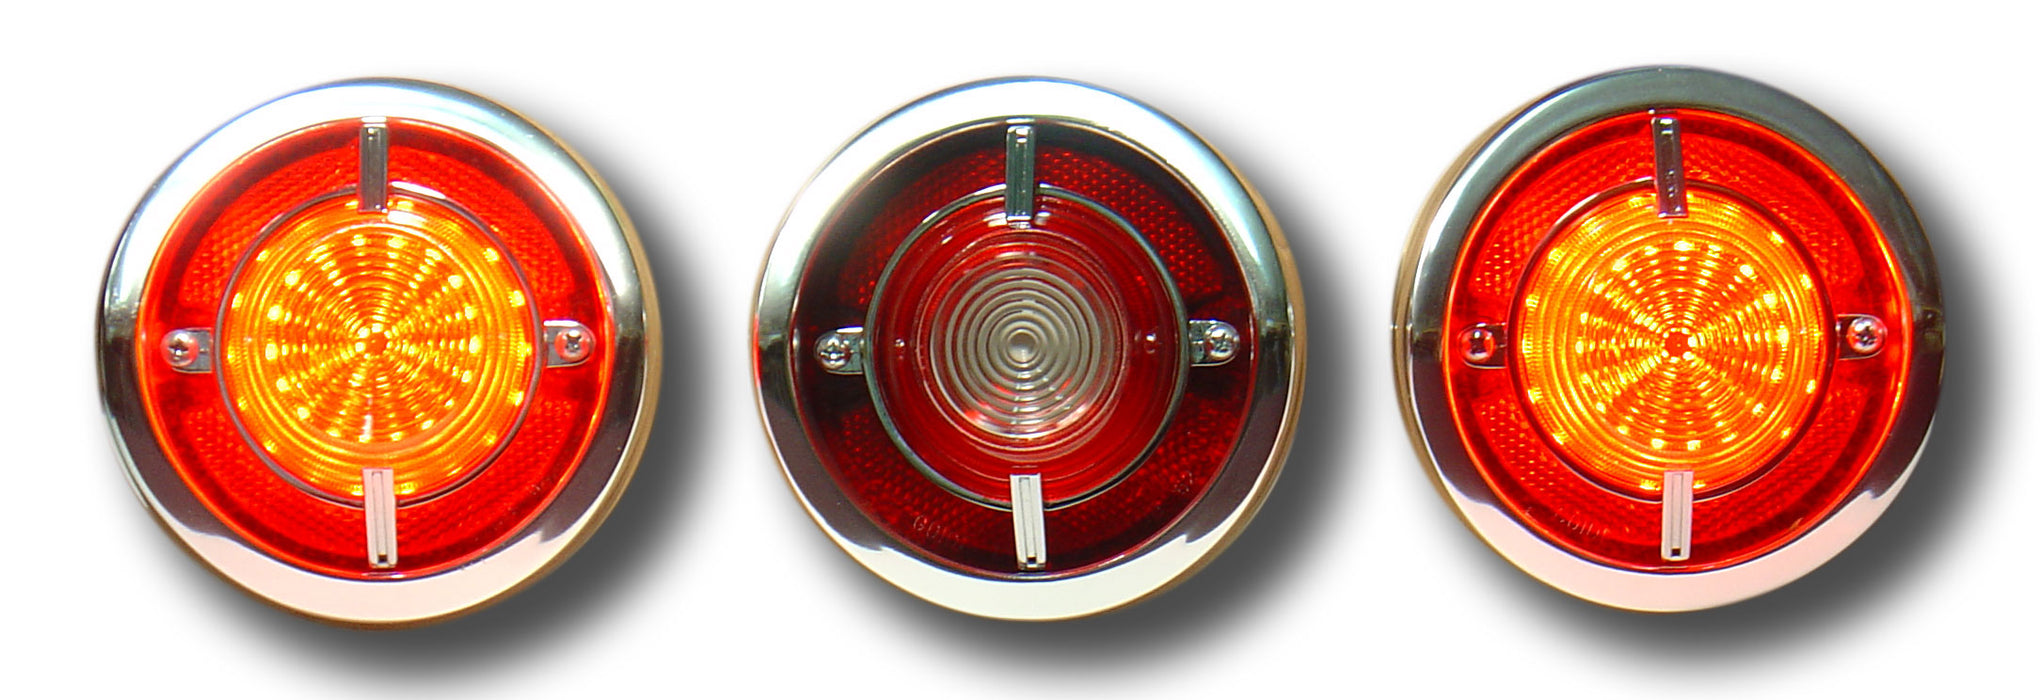 1962 Chevrolet Impala Sequential LED Tail Lights (4 panel)